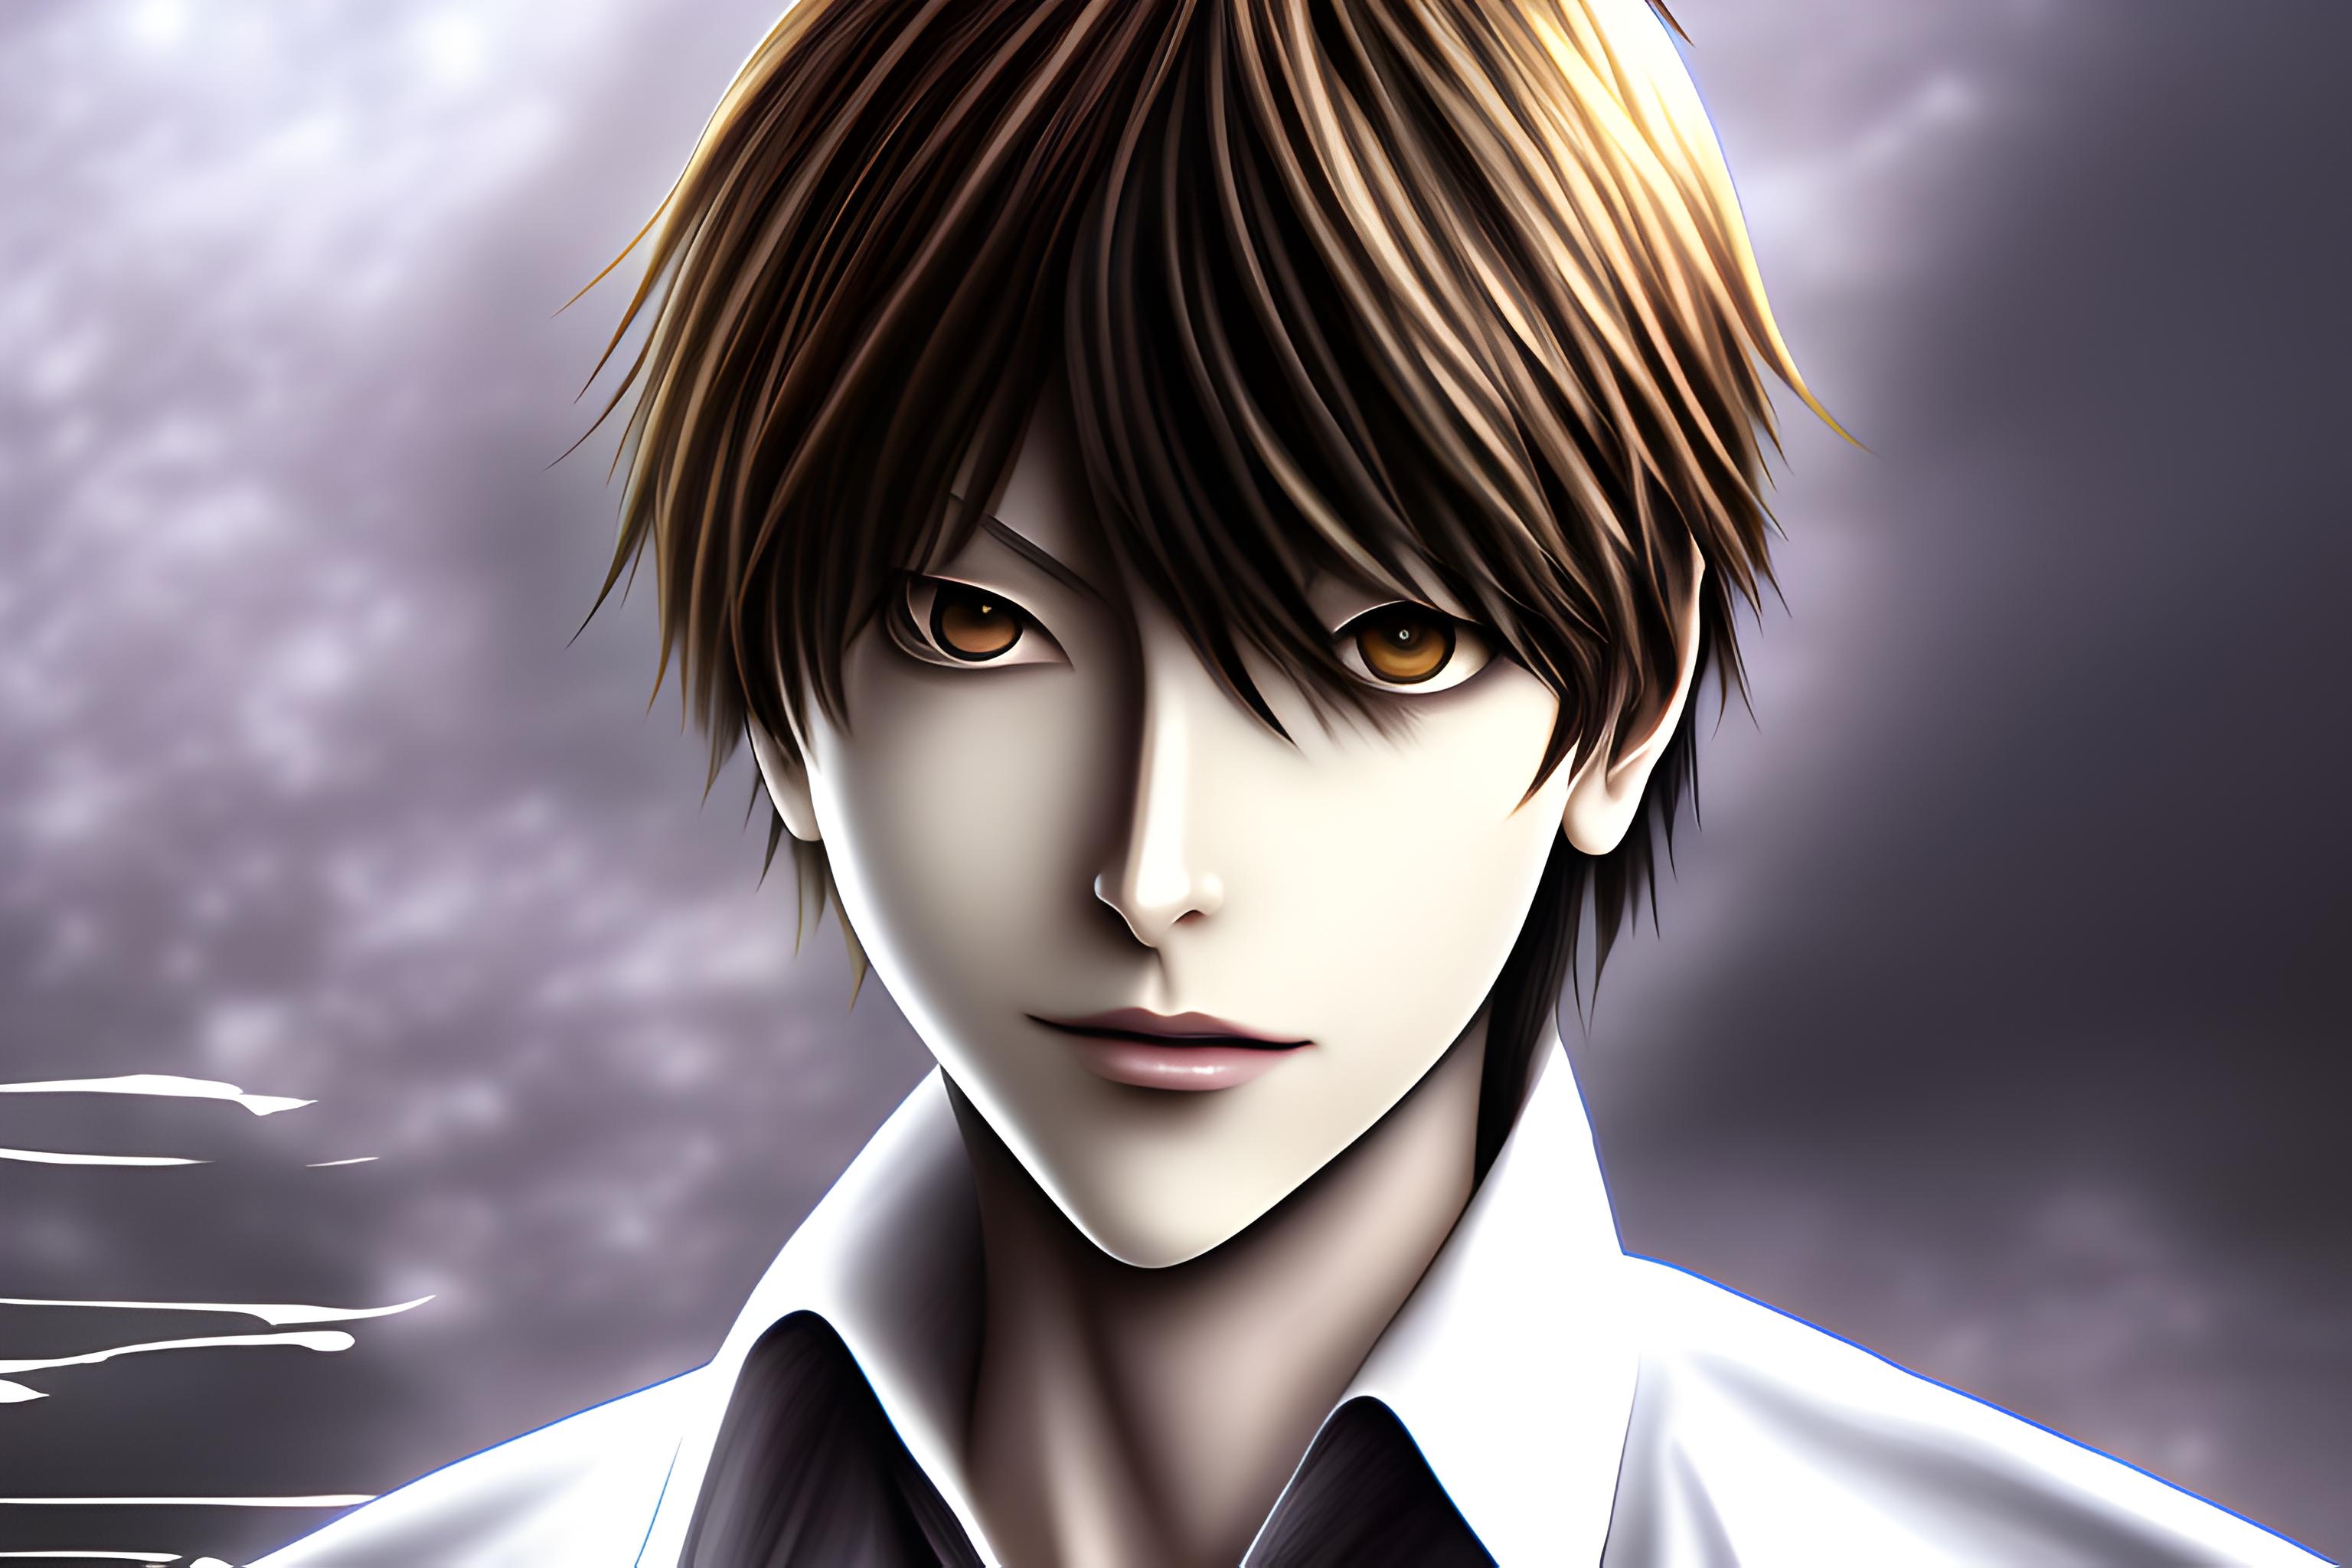 🔥 Free download One side of the wallpaper is yagami light from death ...